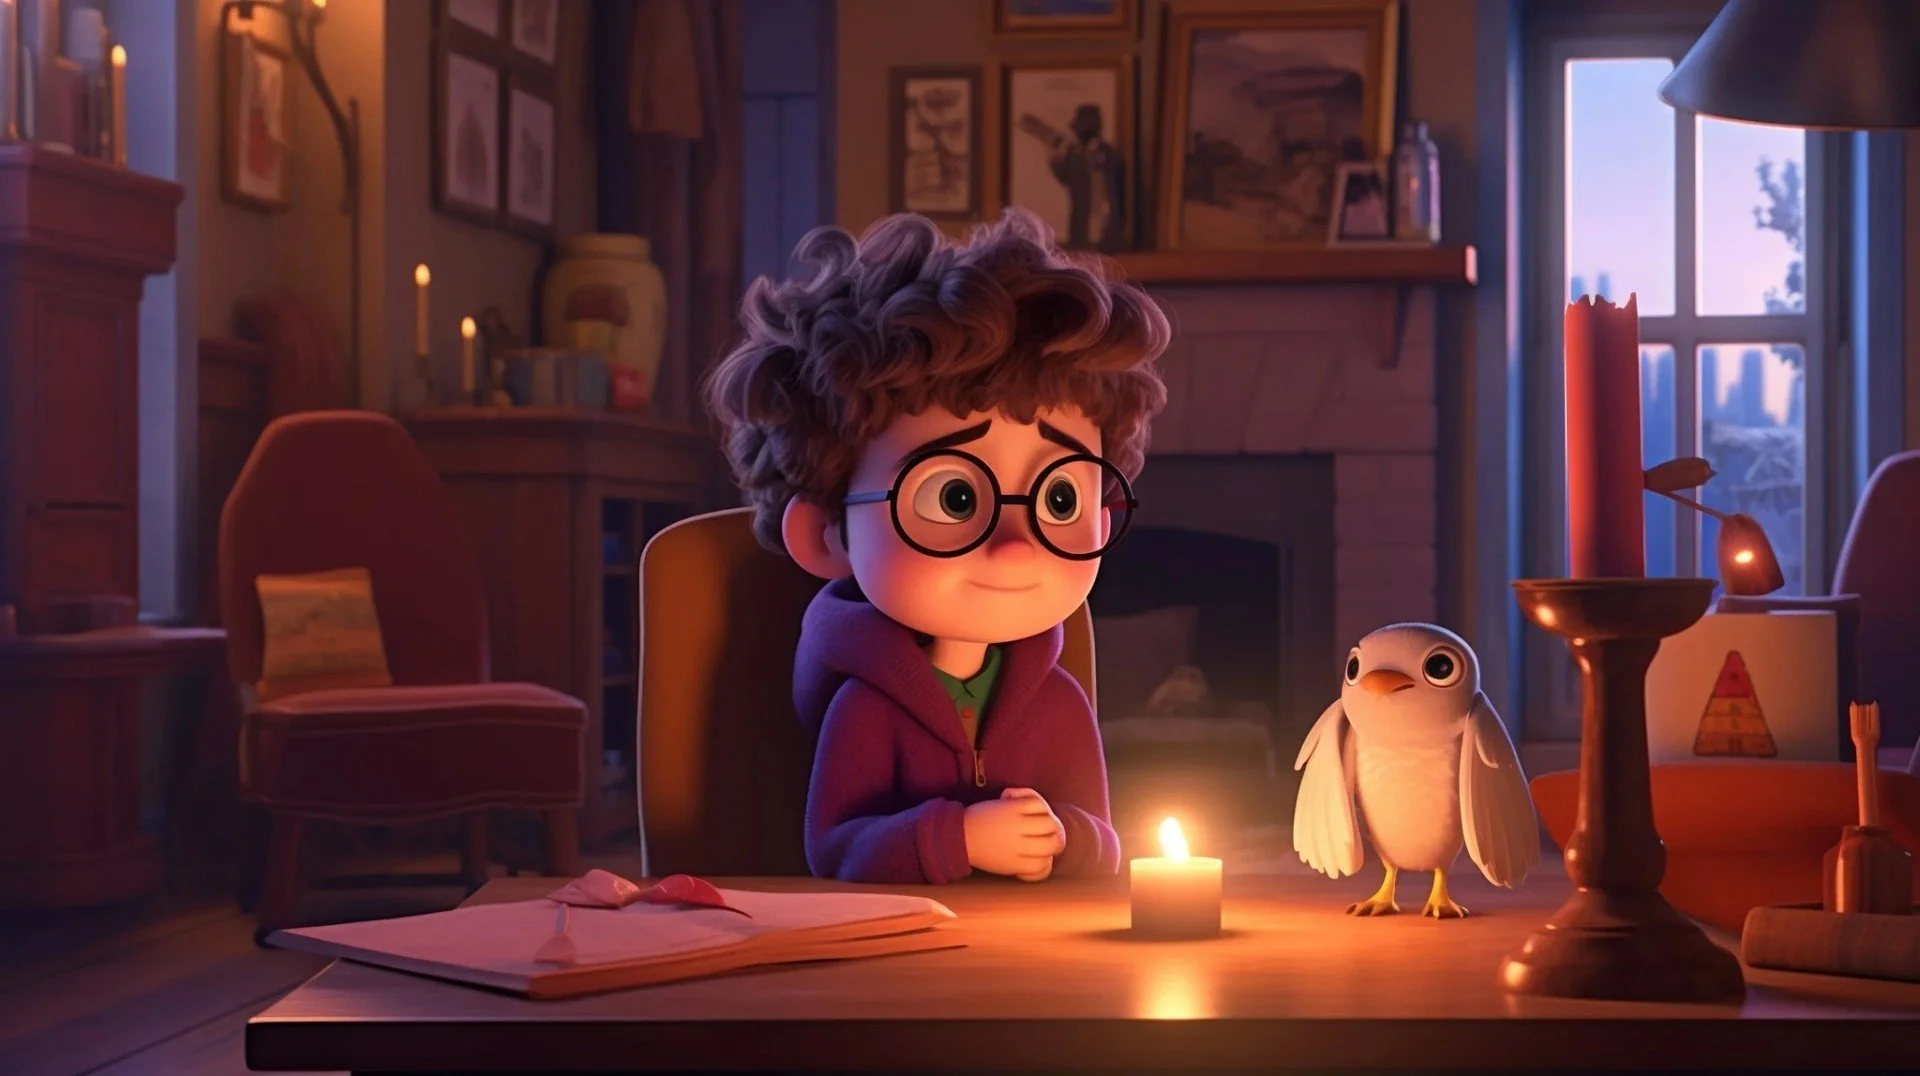 Characters from the Harry Potter franchise were shown in the style of Pixar cartoons